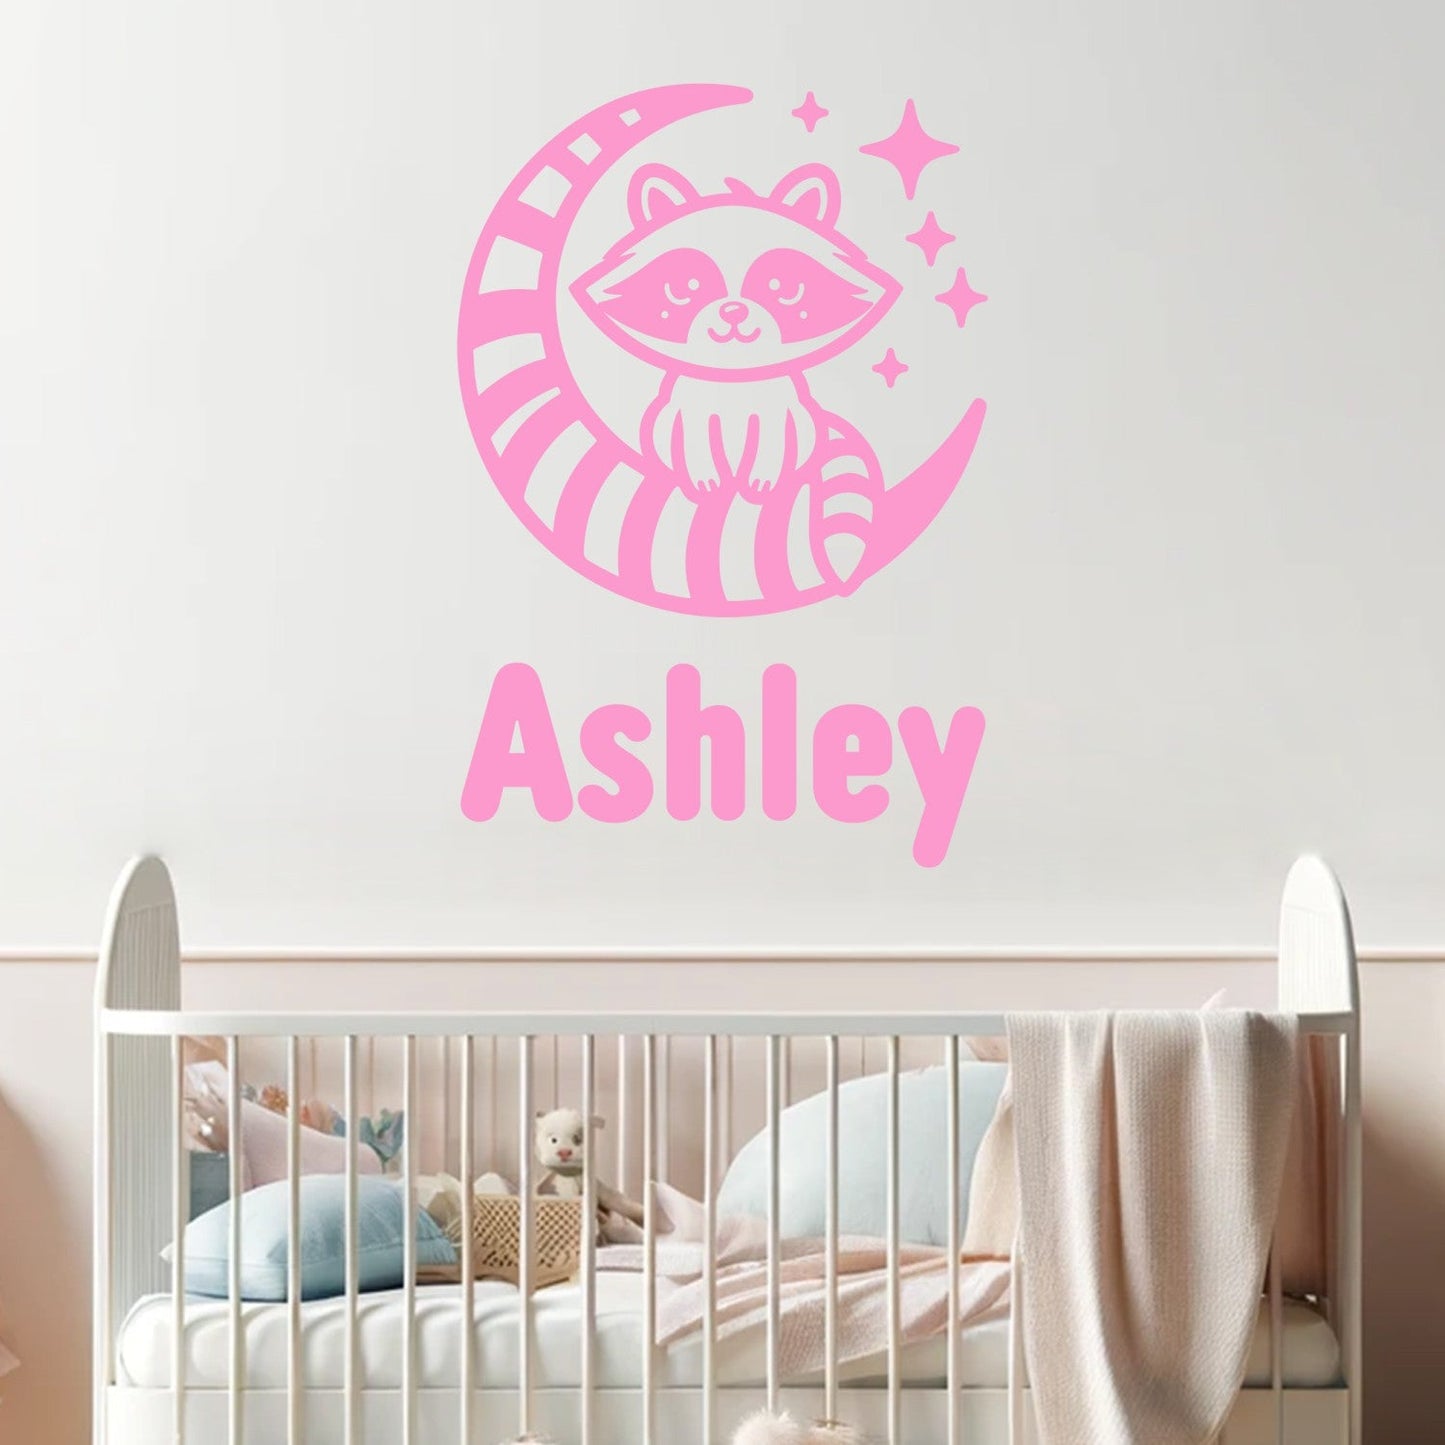 Racoon Nursery Wall Decal - Animals Wall Stickers - Personalized Name Decal for Kids Room - Racoon Stickers with Personalized Name